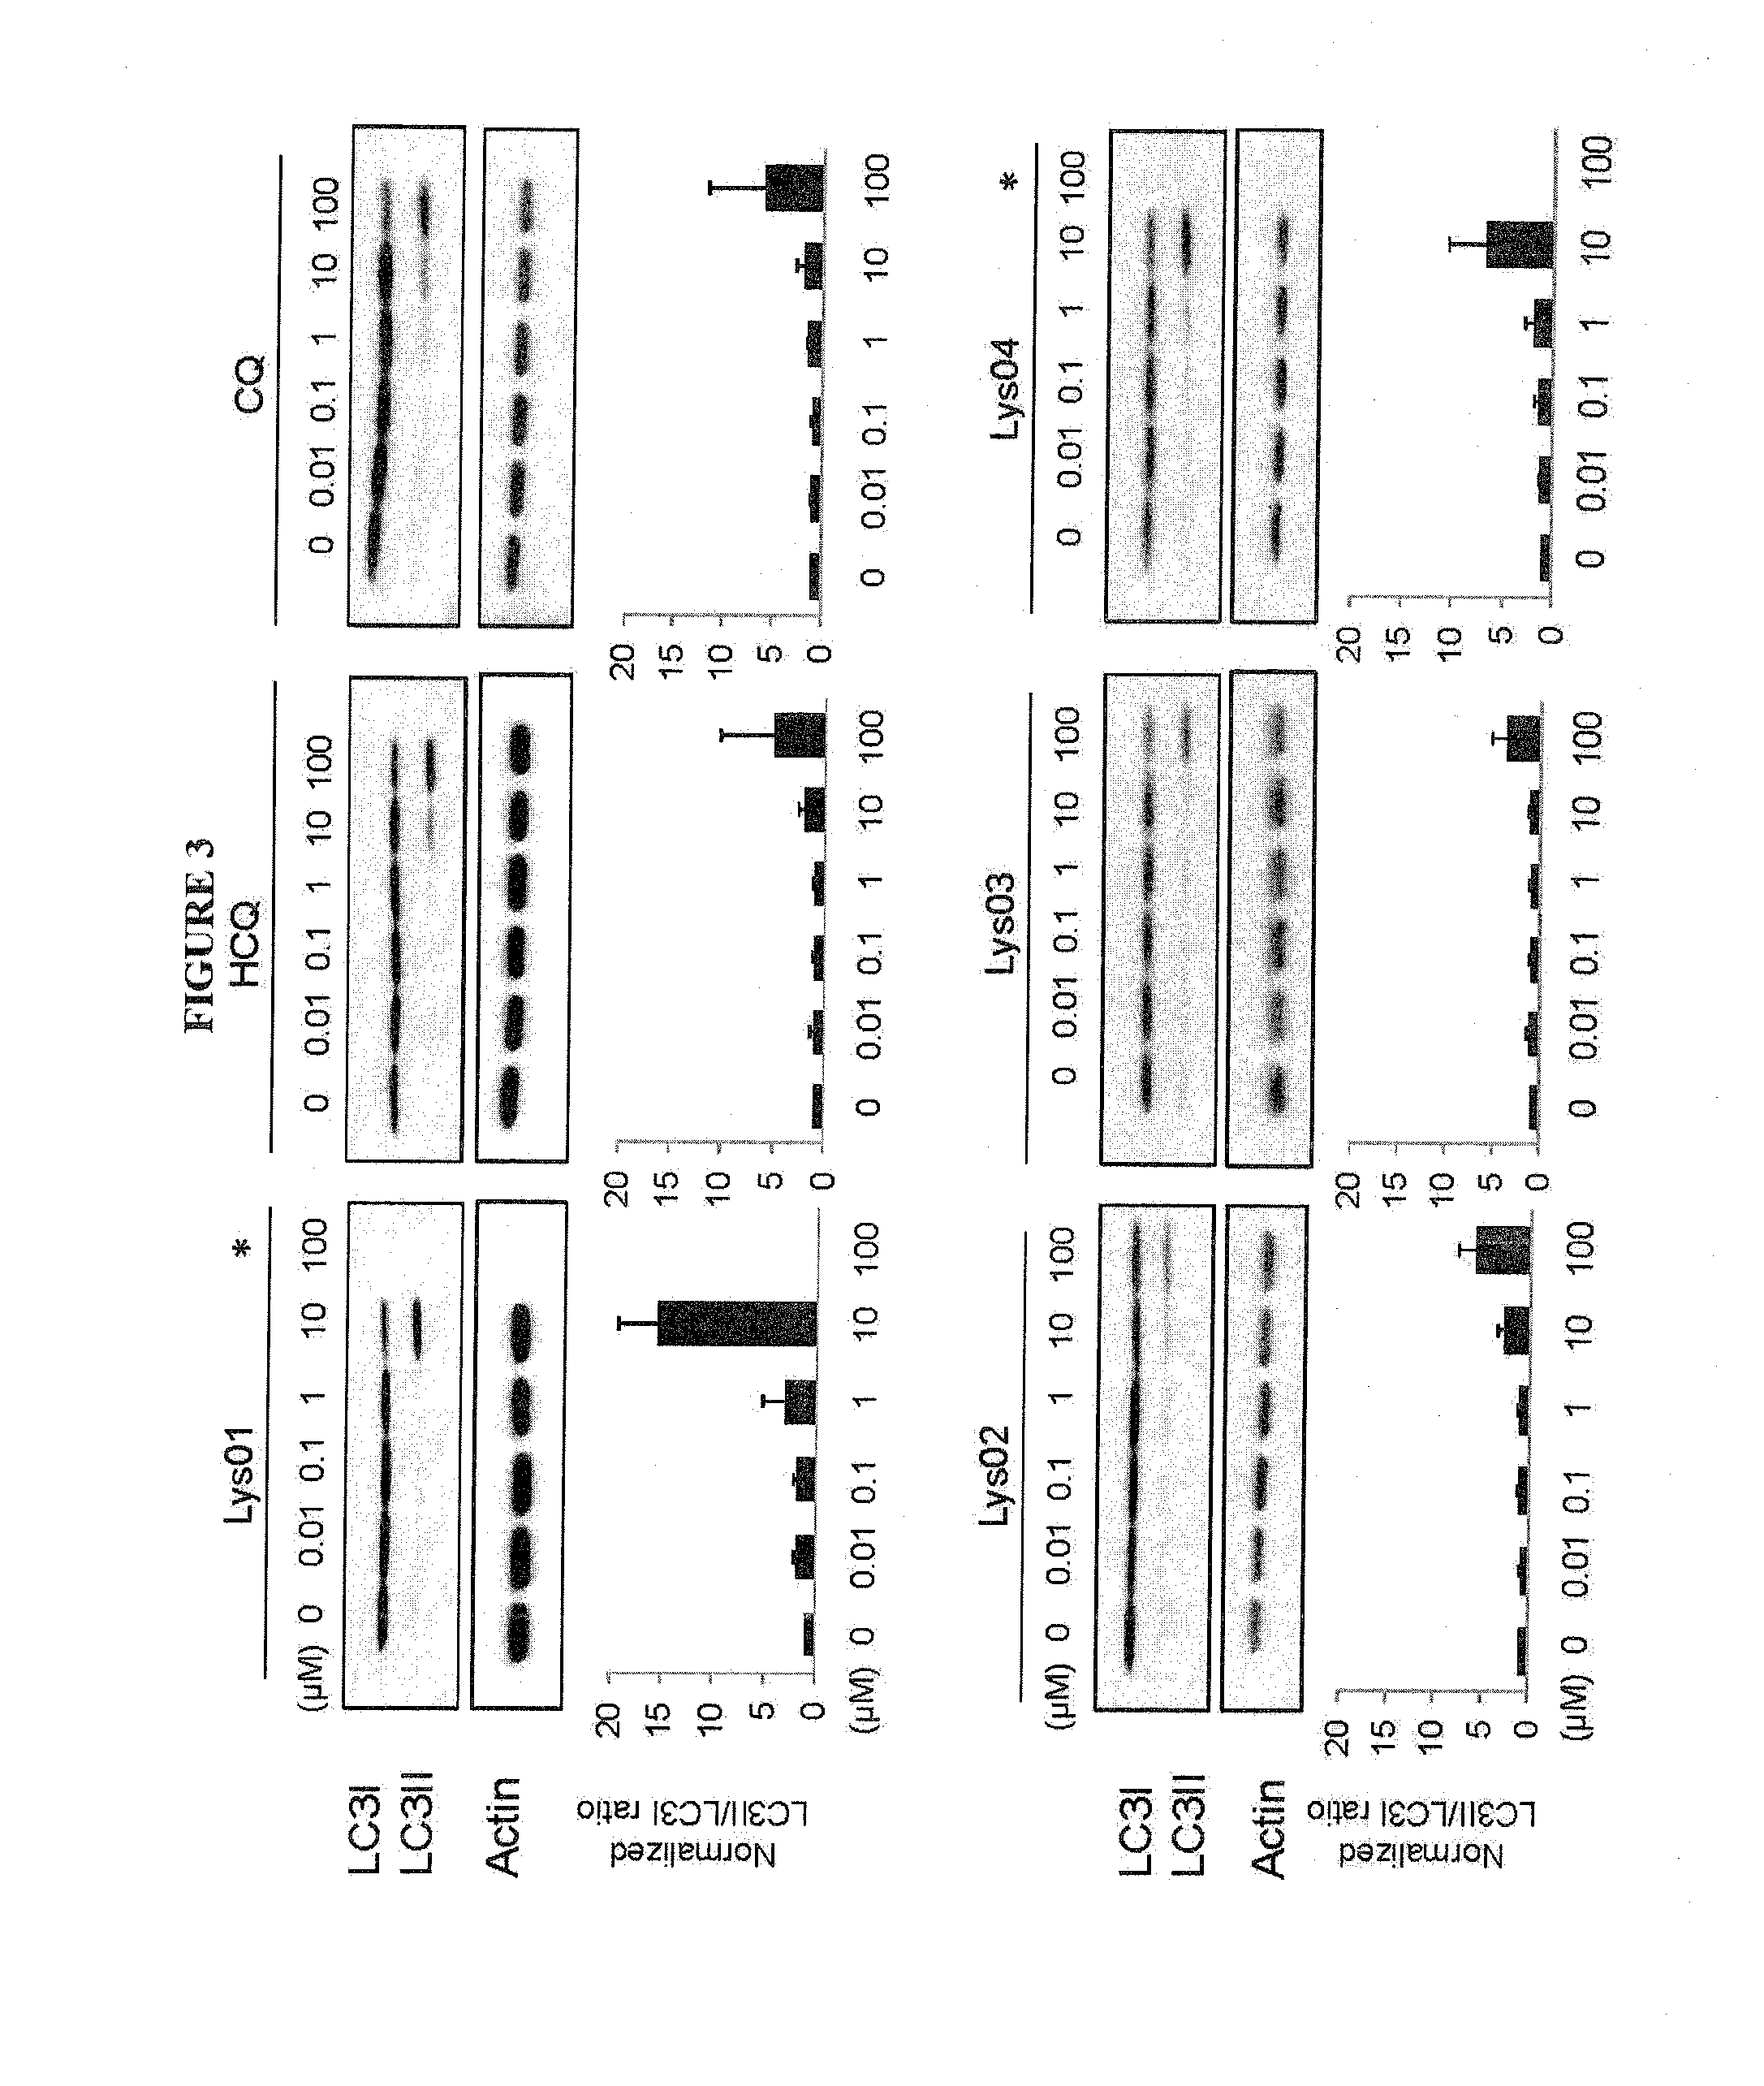 Novel bisaminoquinoline compounds, pharmaceutical compositions prepared therefrom and their use